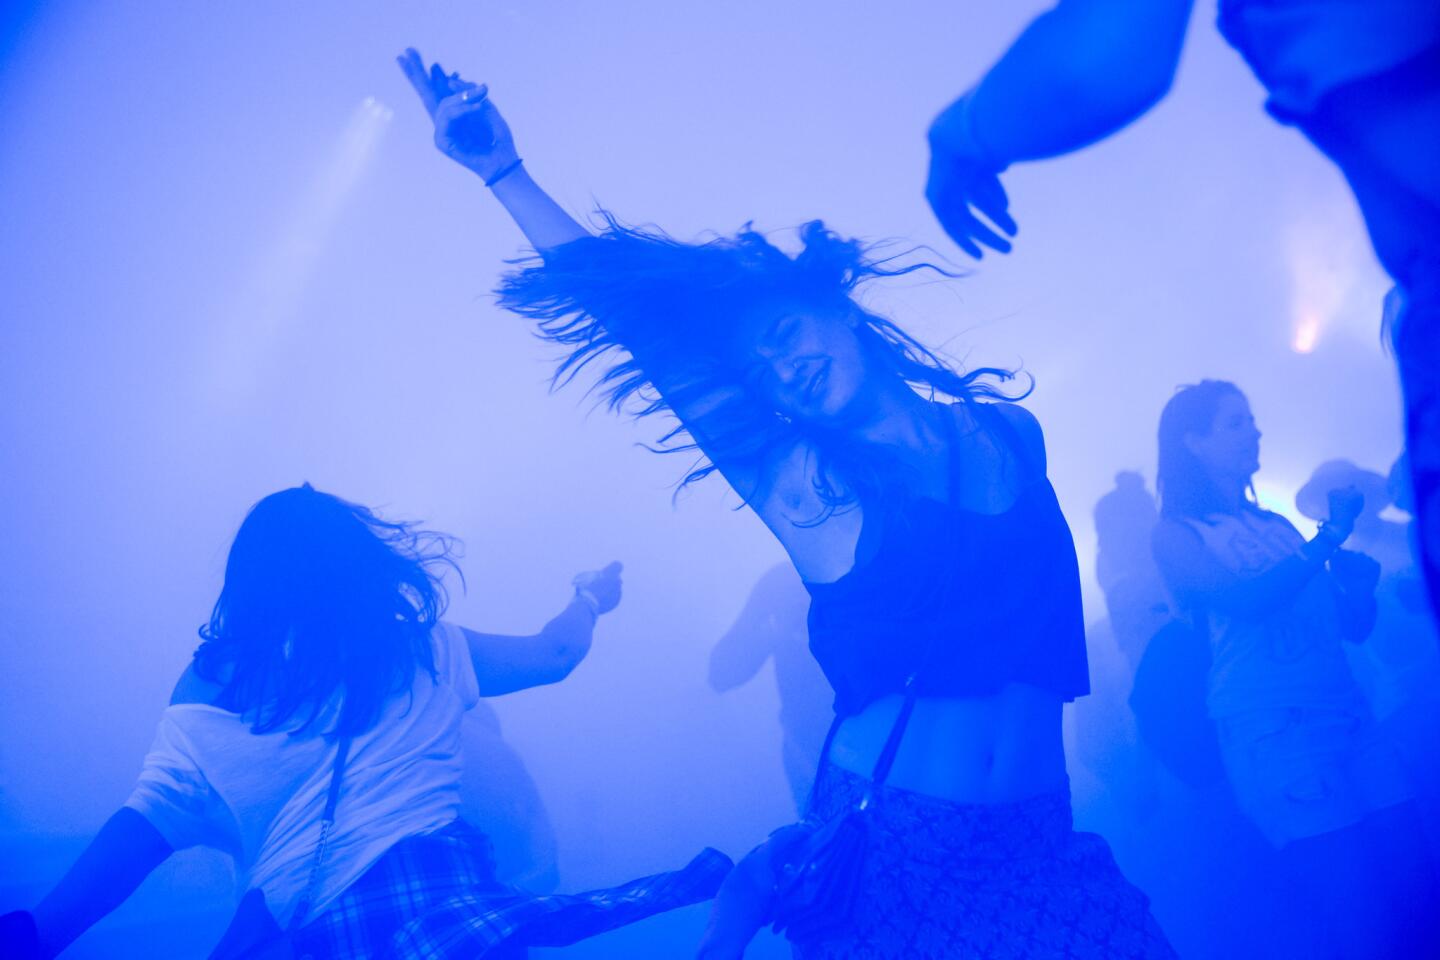 A music fan flings her hair to the beats of EDM music during Week 2 of the Coachella Valley Music and Arts Festival, 2015.